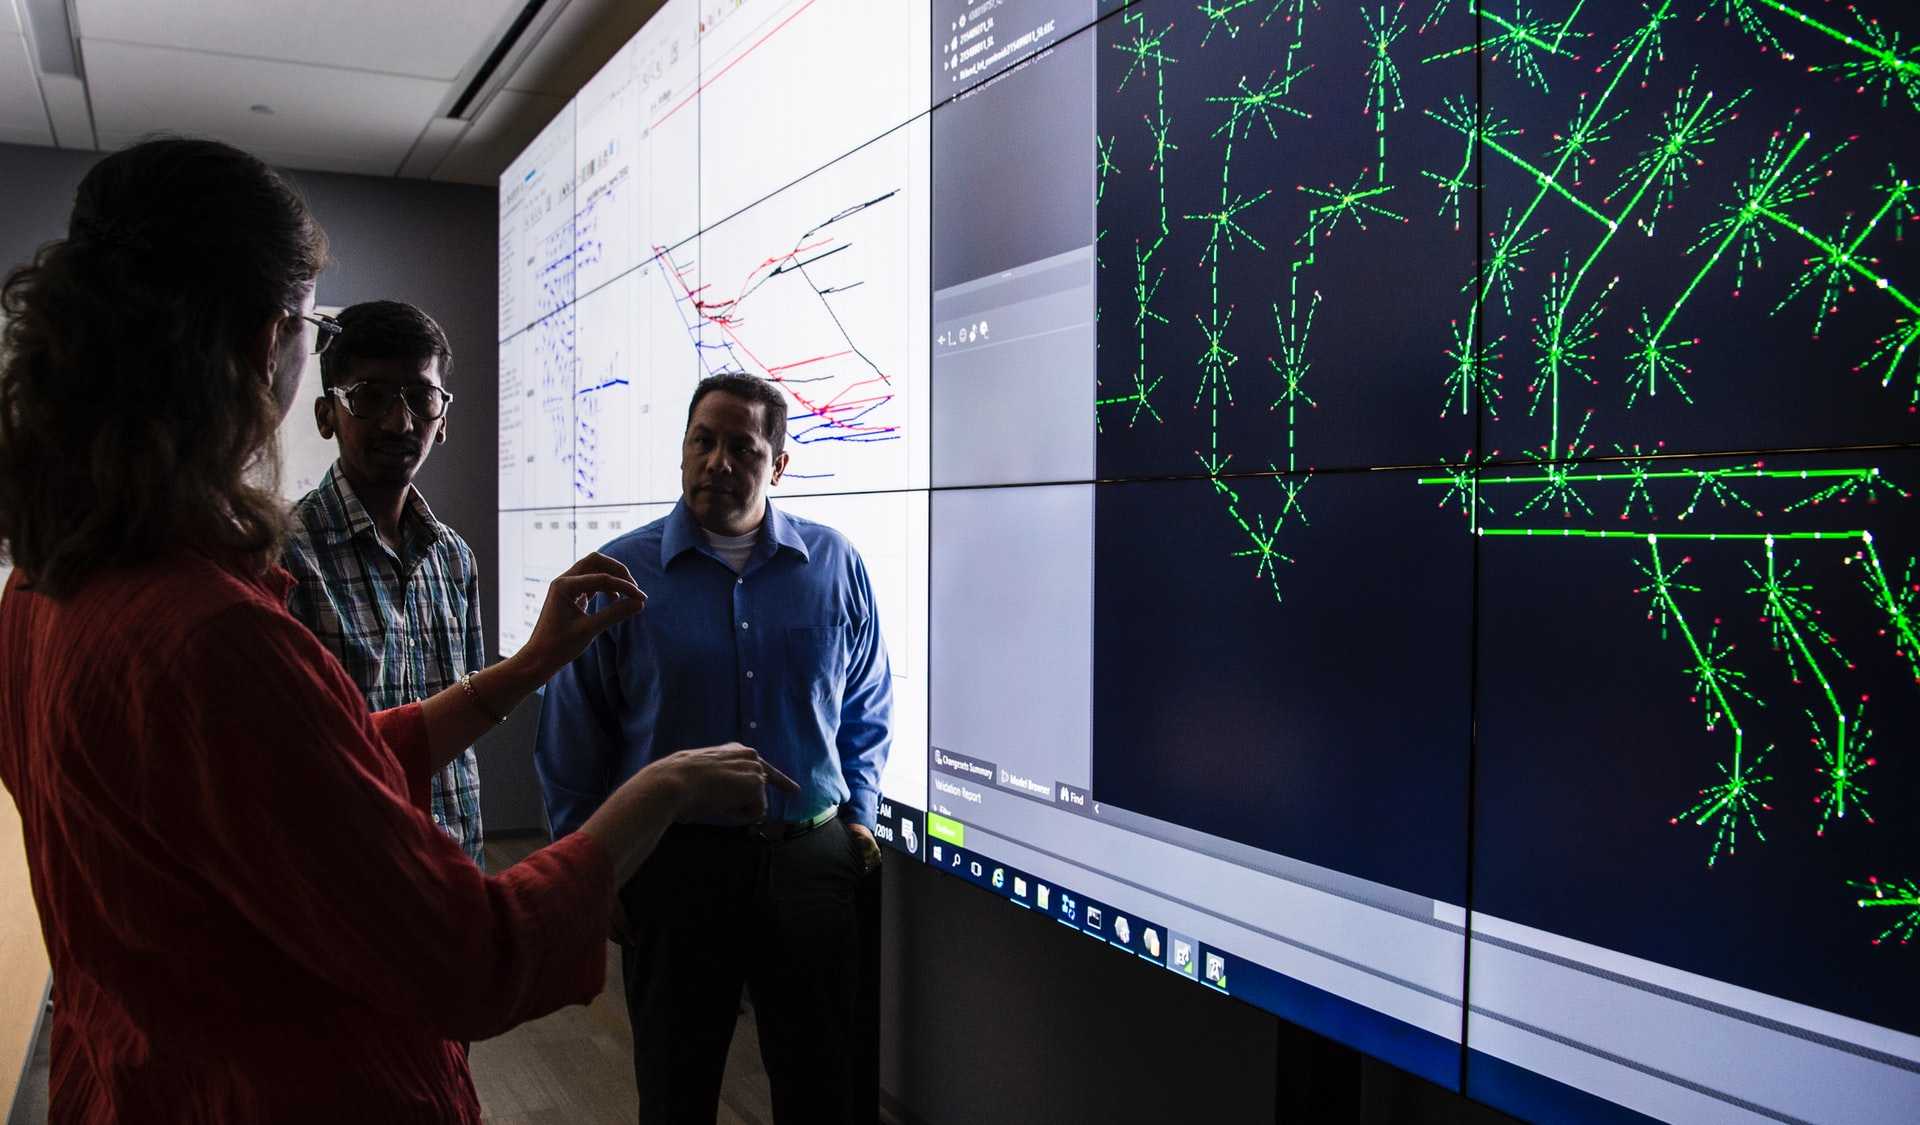 Three researchers discuss a wall-sized display of an energy grid simulation.